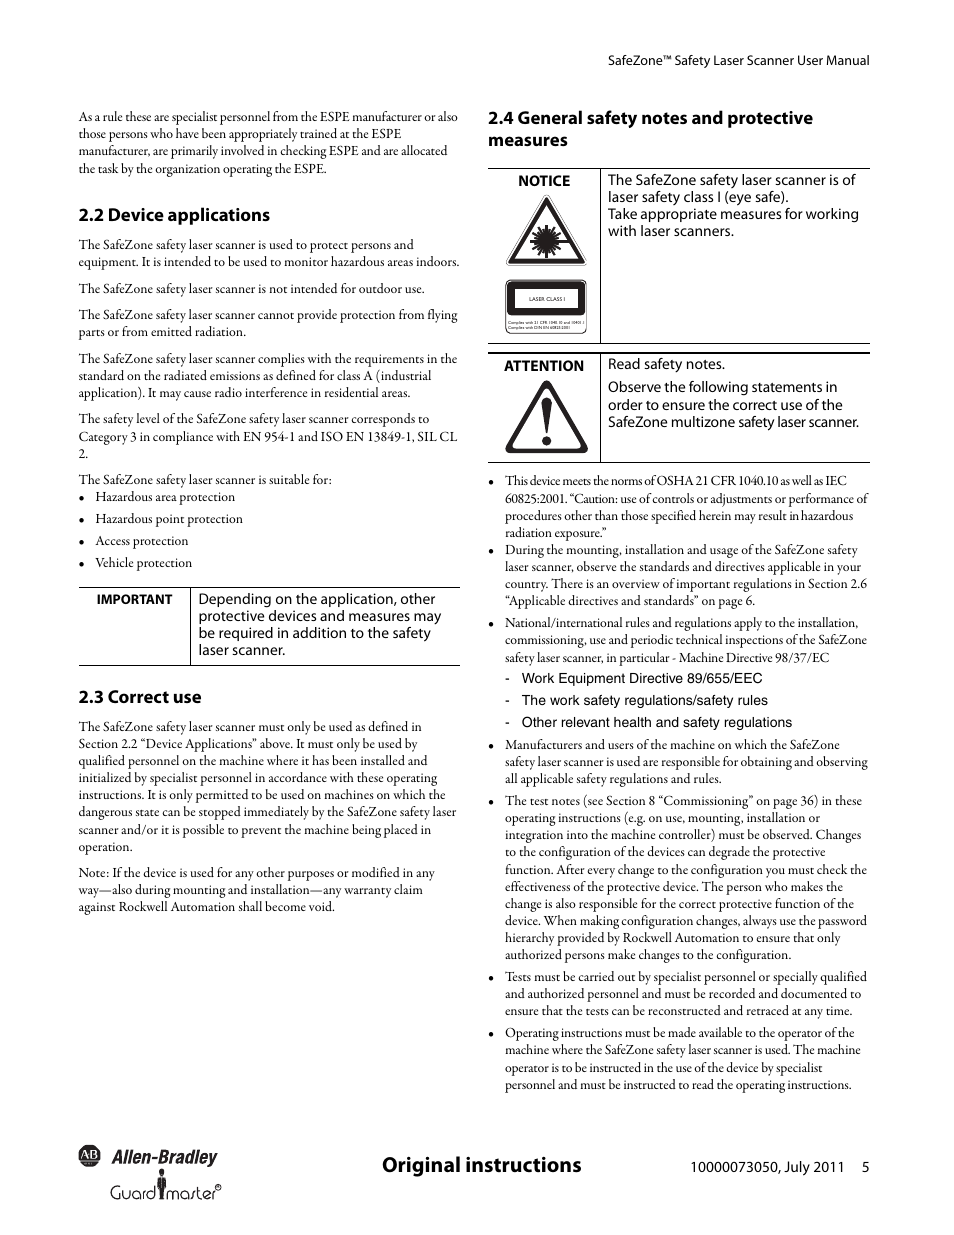 Original instructions, 2 device applications, 3 correct use | Rockwell Automation 442L SafeZone Singlezone & Multizone Safety Laser Scanner User Manual | Page 7 / 60